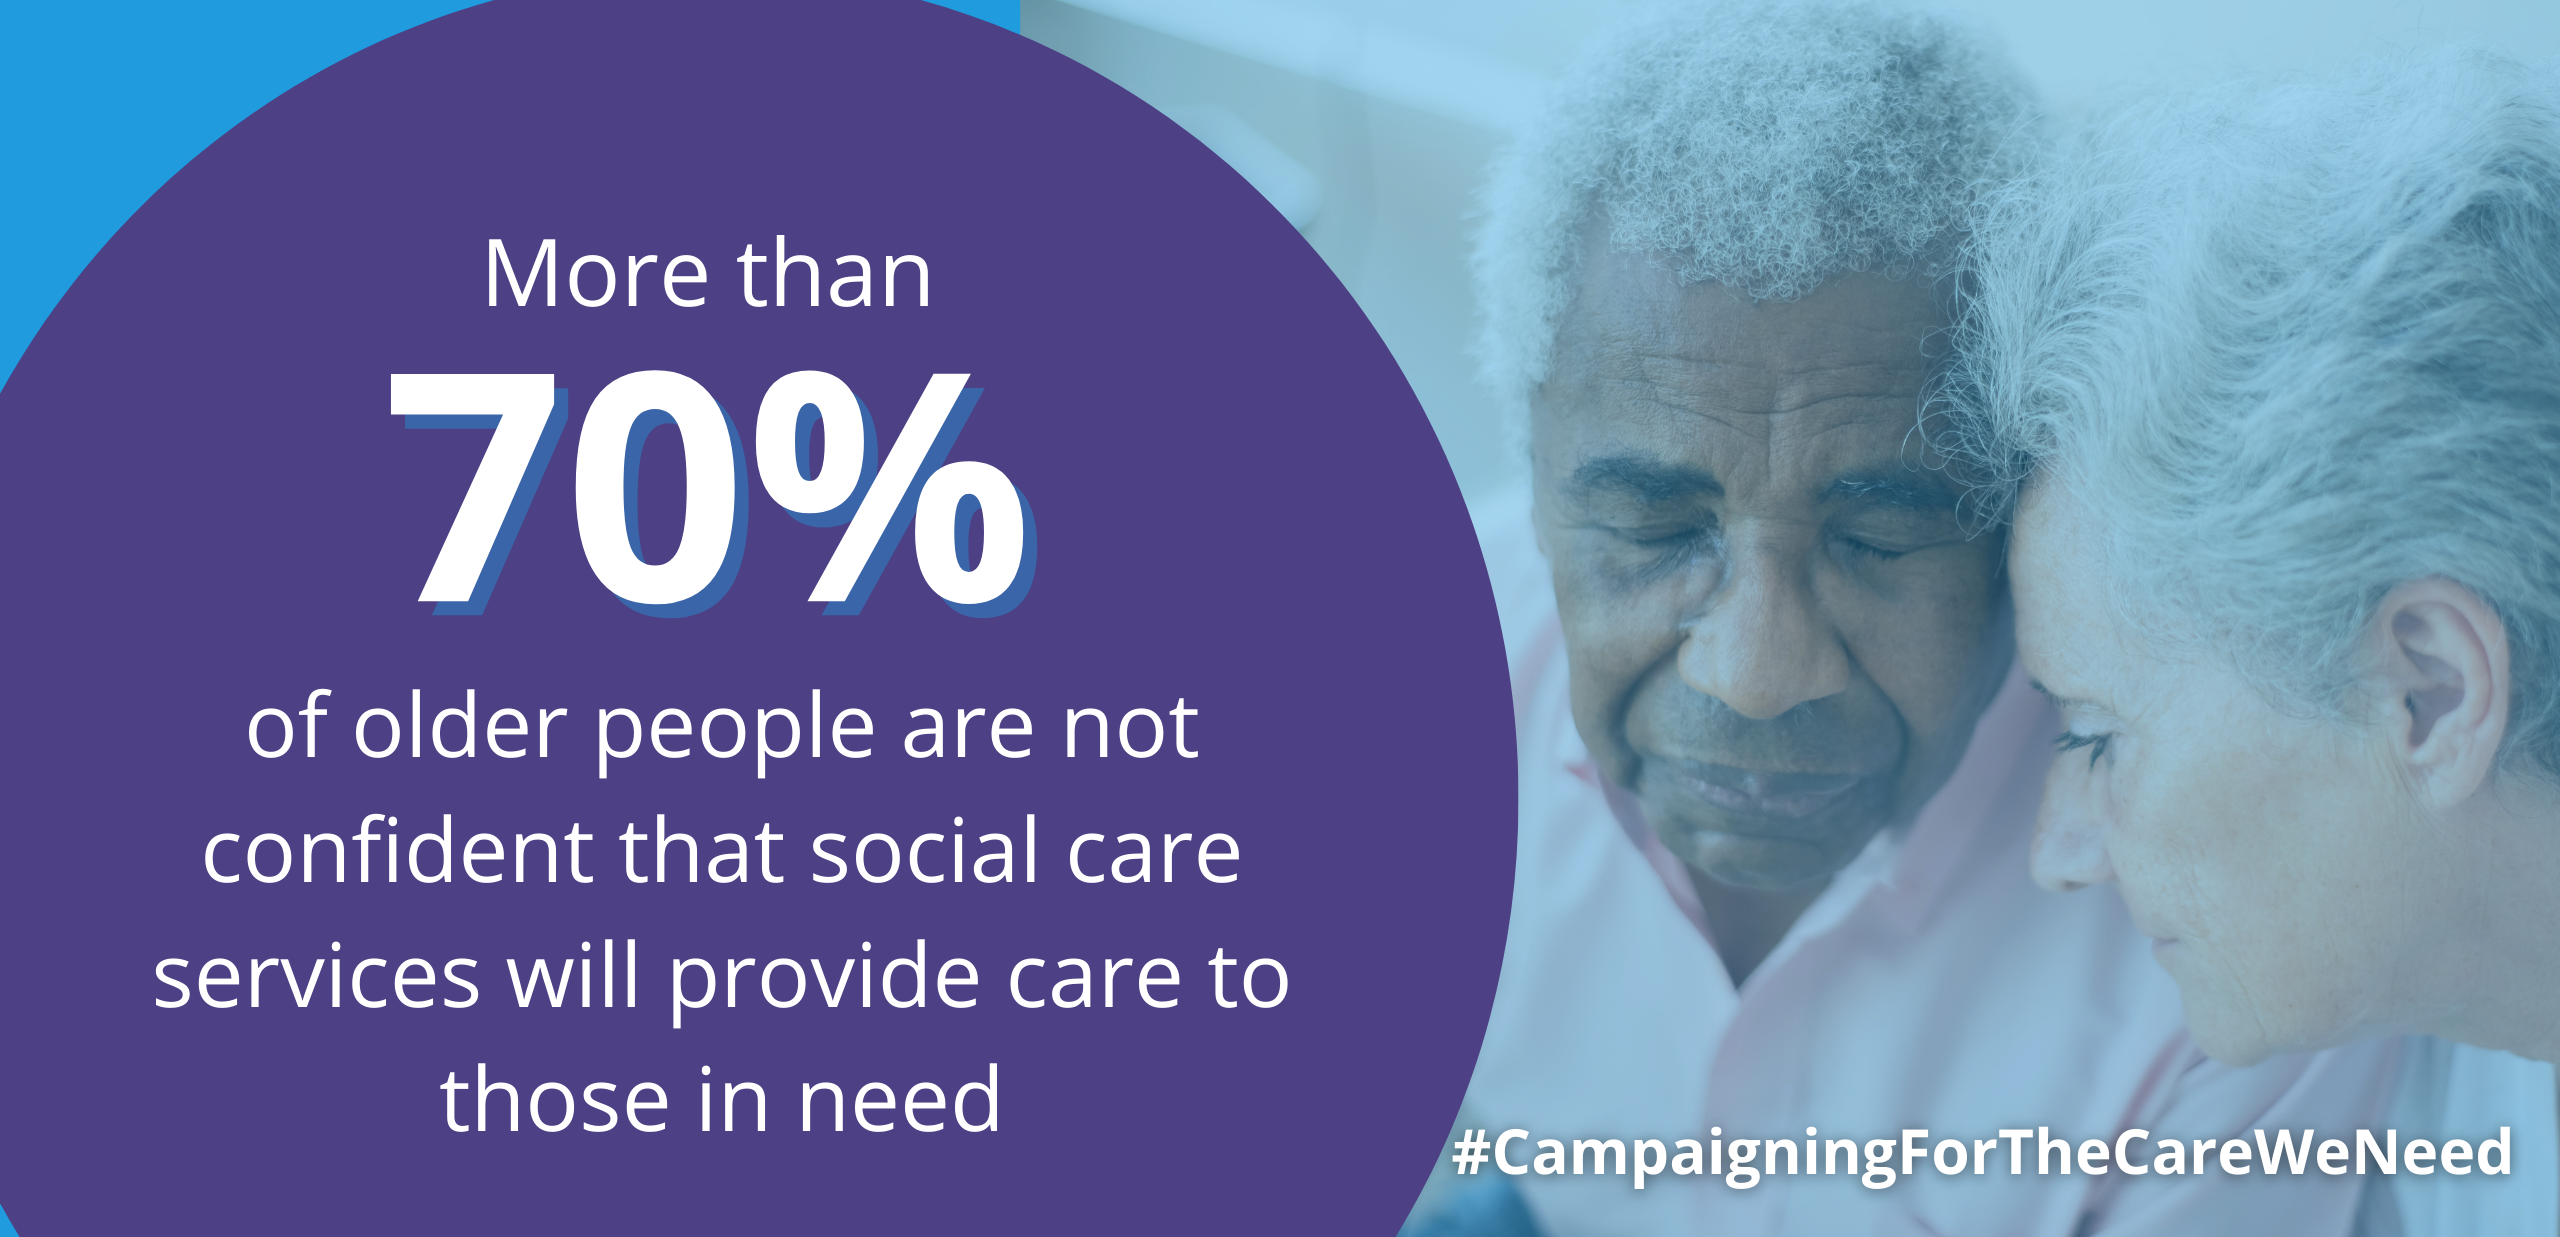 A photo of an older couple who look worried. The image reads 'More than 70% of older people are not confident that social care services will provide care to those in need'